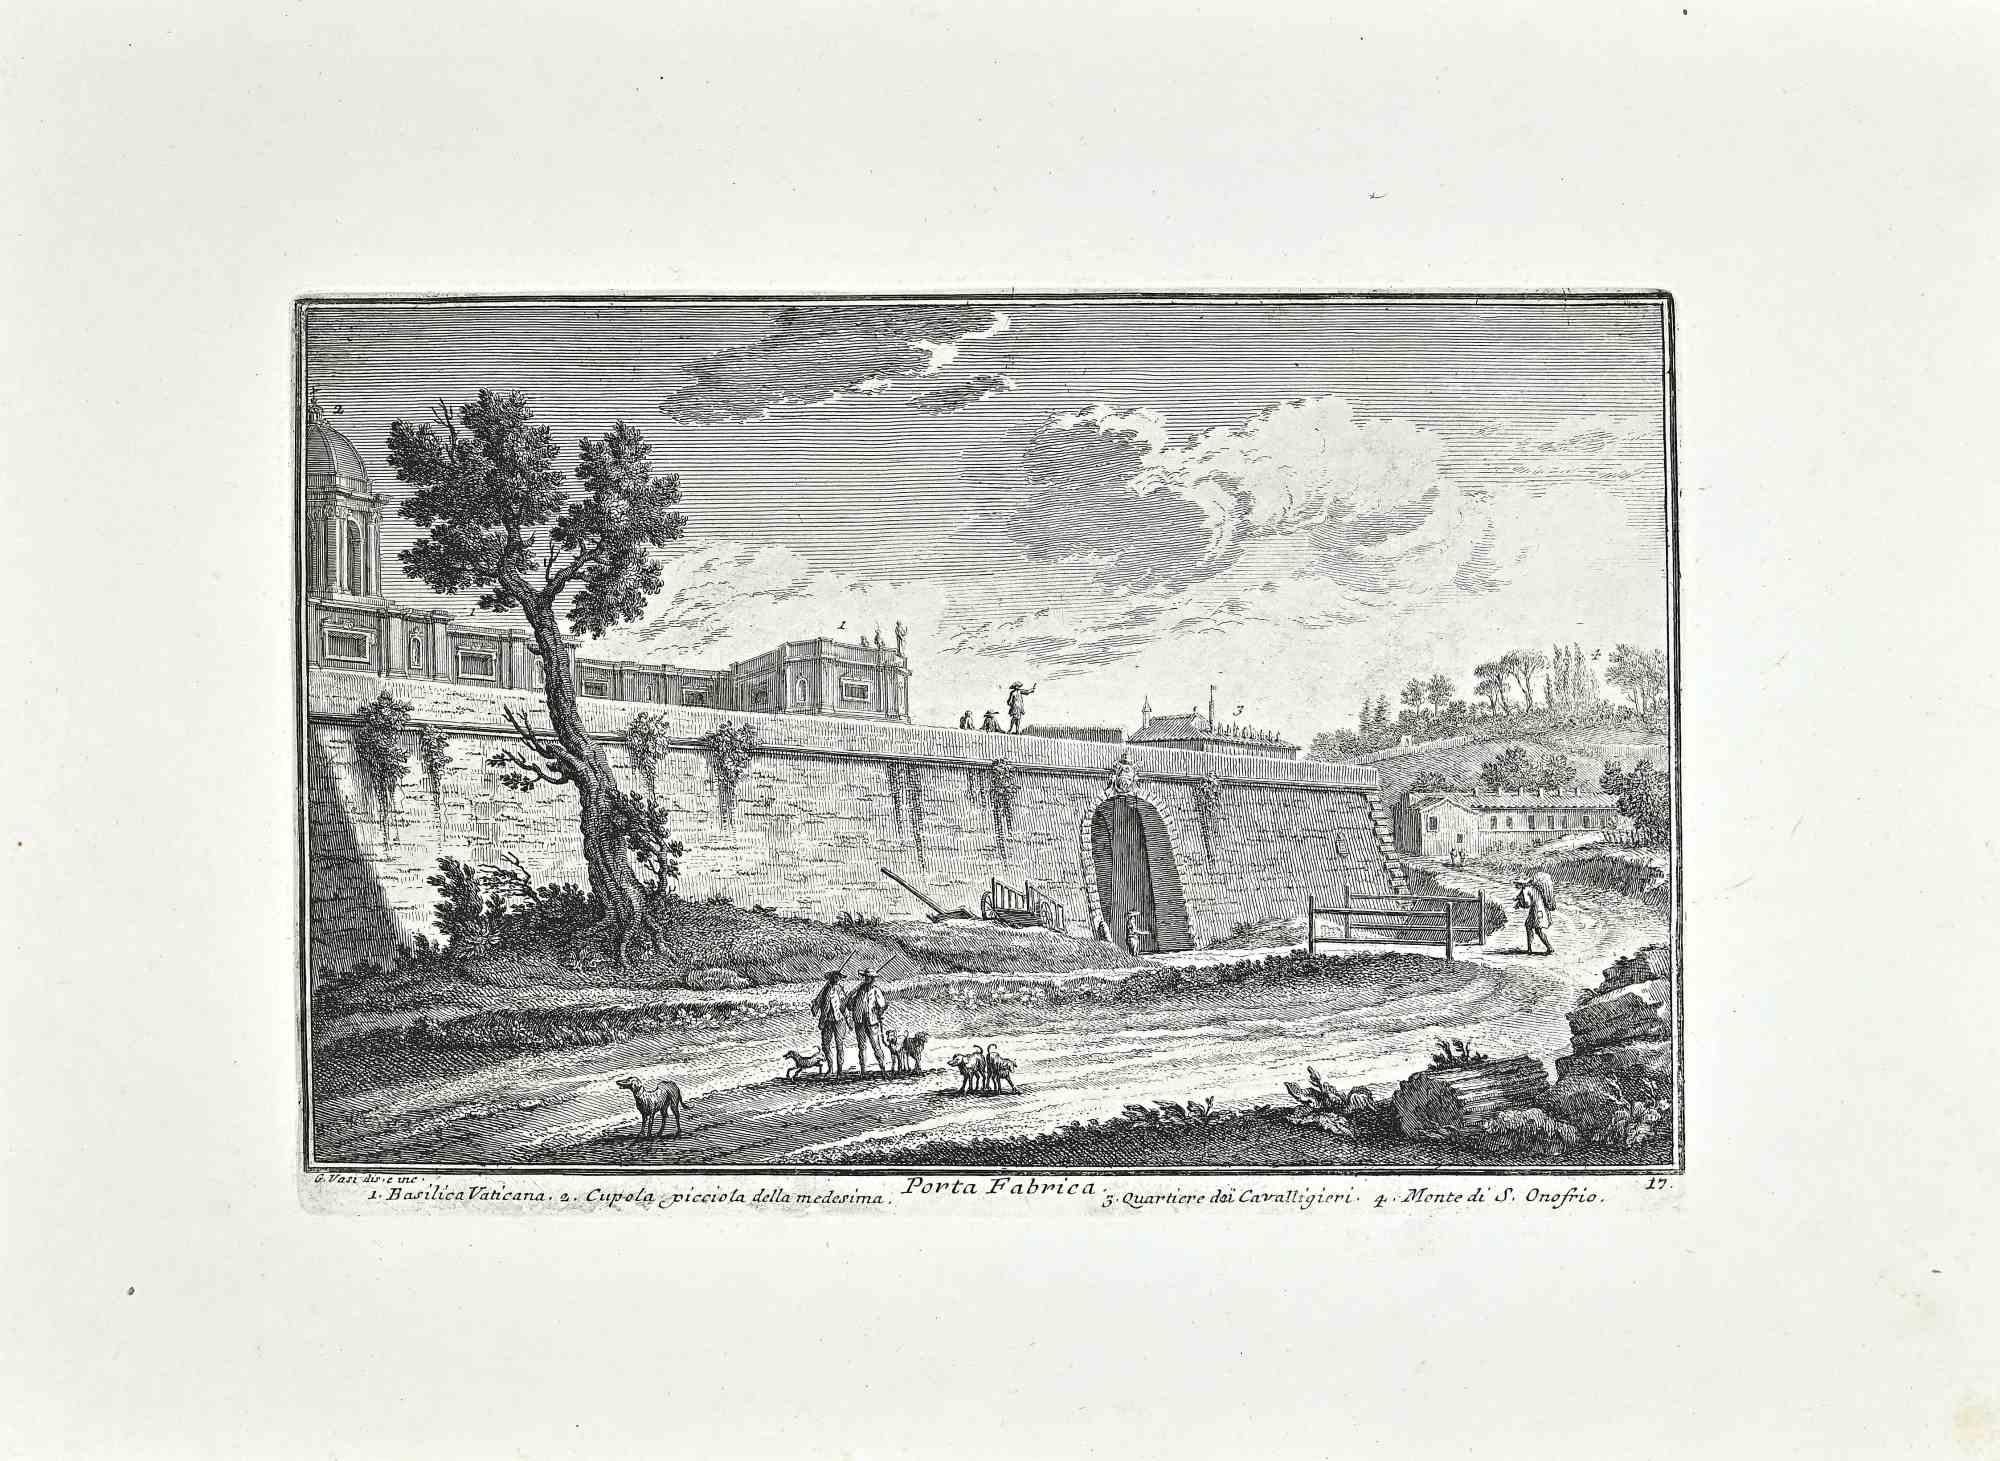 Porta Fabrica is an original etching of the Late 18th century realized by Giuseppe Vasi.

Signed and titled on plate lower margin. 

Good conditions.

Giuseppe Vasi  (Corleone,1710 - Rome, 1782) was an engraver, architect, and landscape artist.